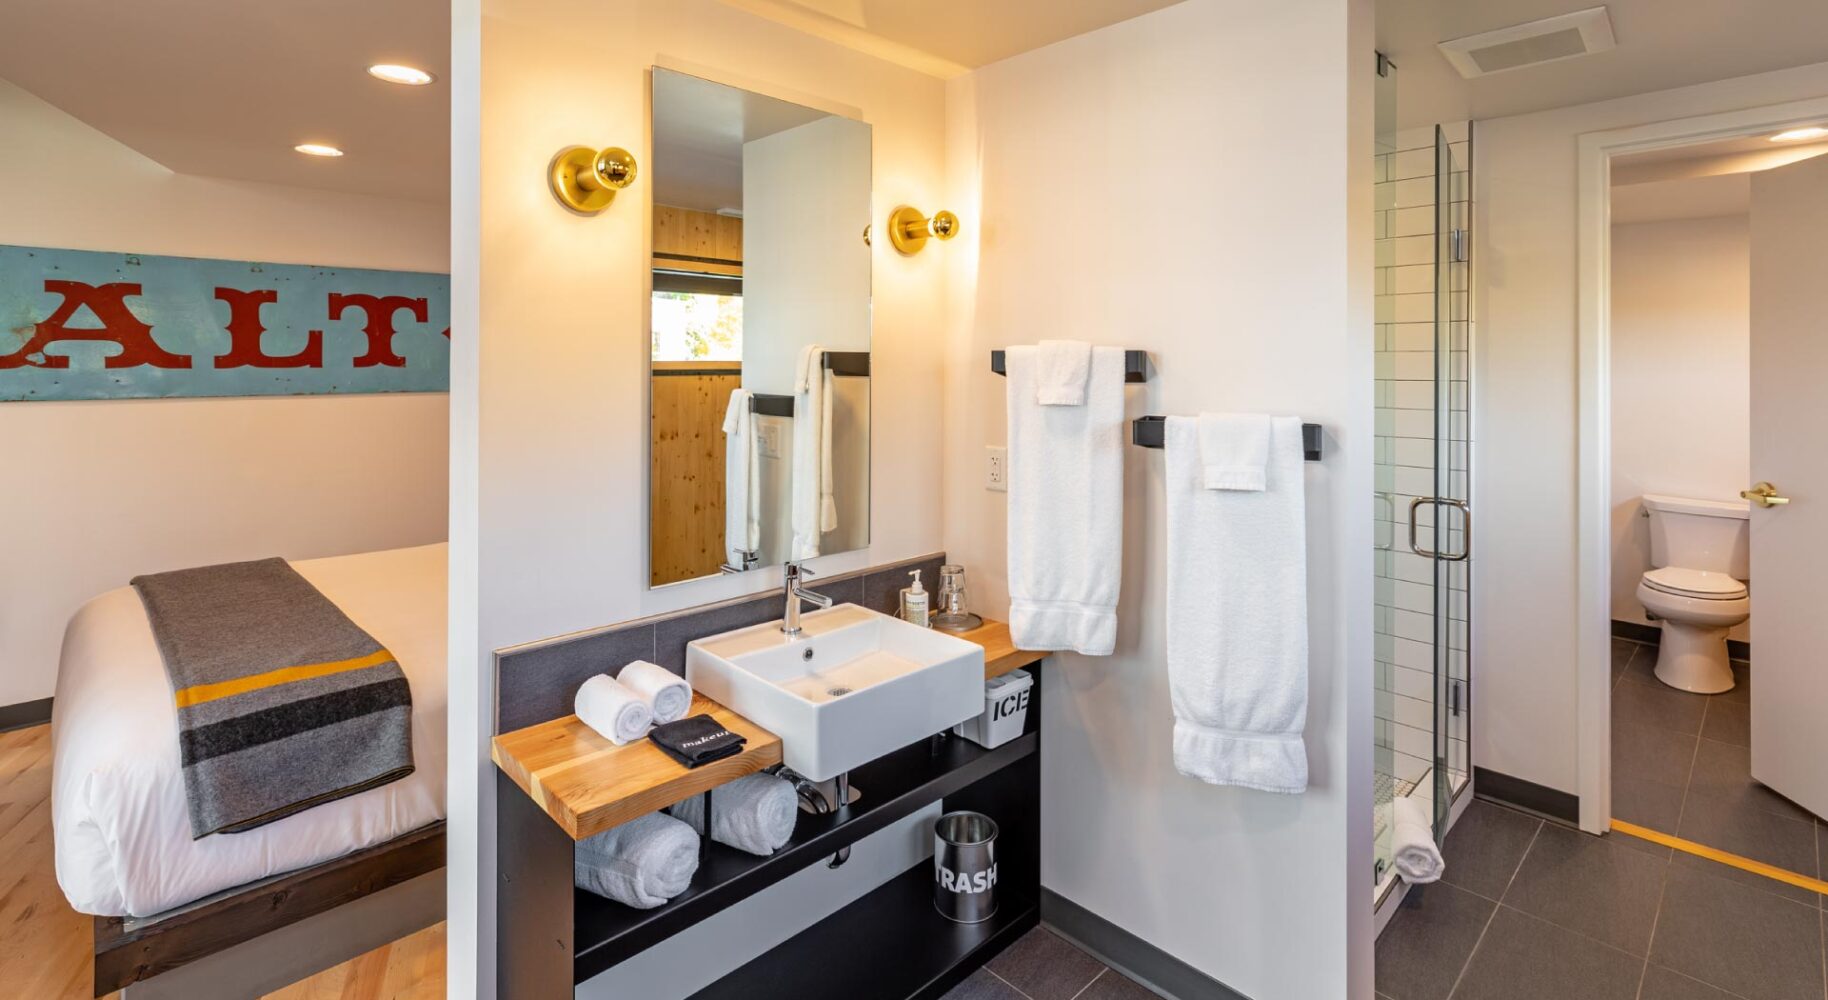 http://Interior%20view%20of%20the%20bathroom%20in%20our%20downtown%20Bozeman%20hotel%20room%20suite.%20Small%20vanity,%20white%20walls,%20and%20walk%20in%20shower